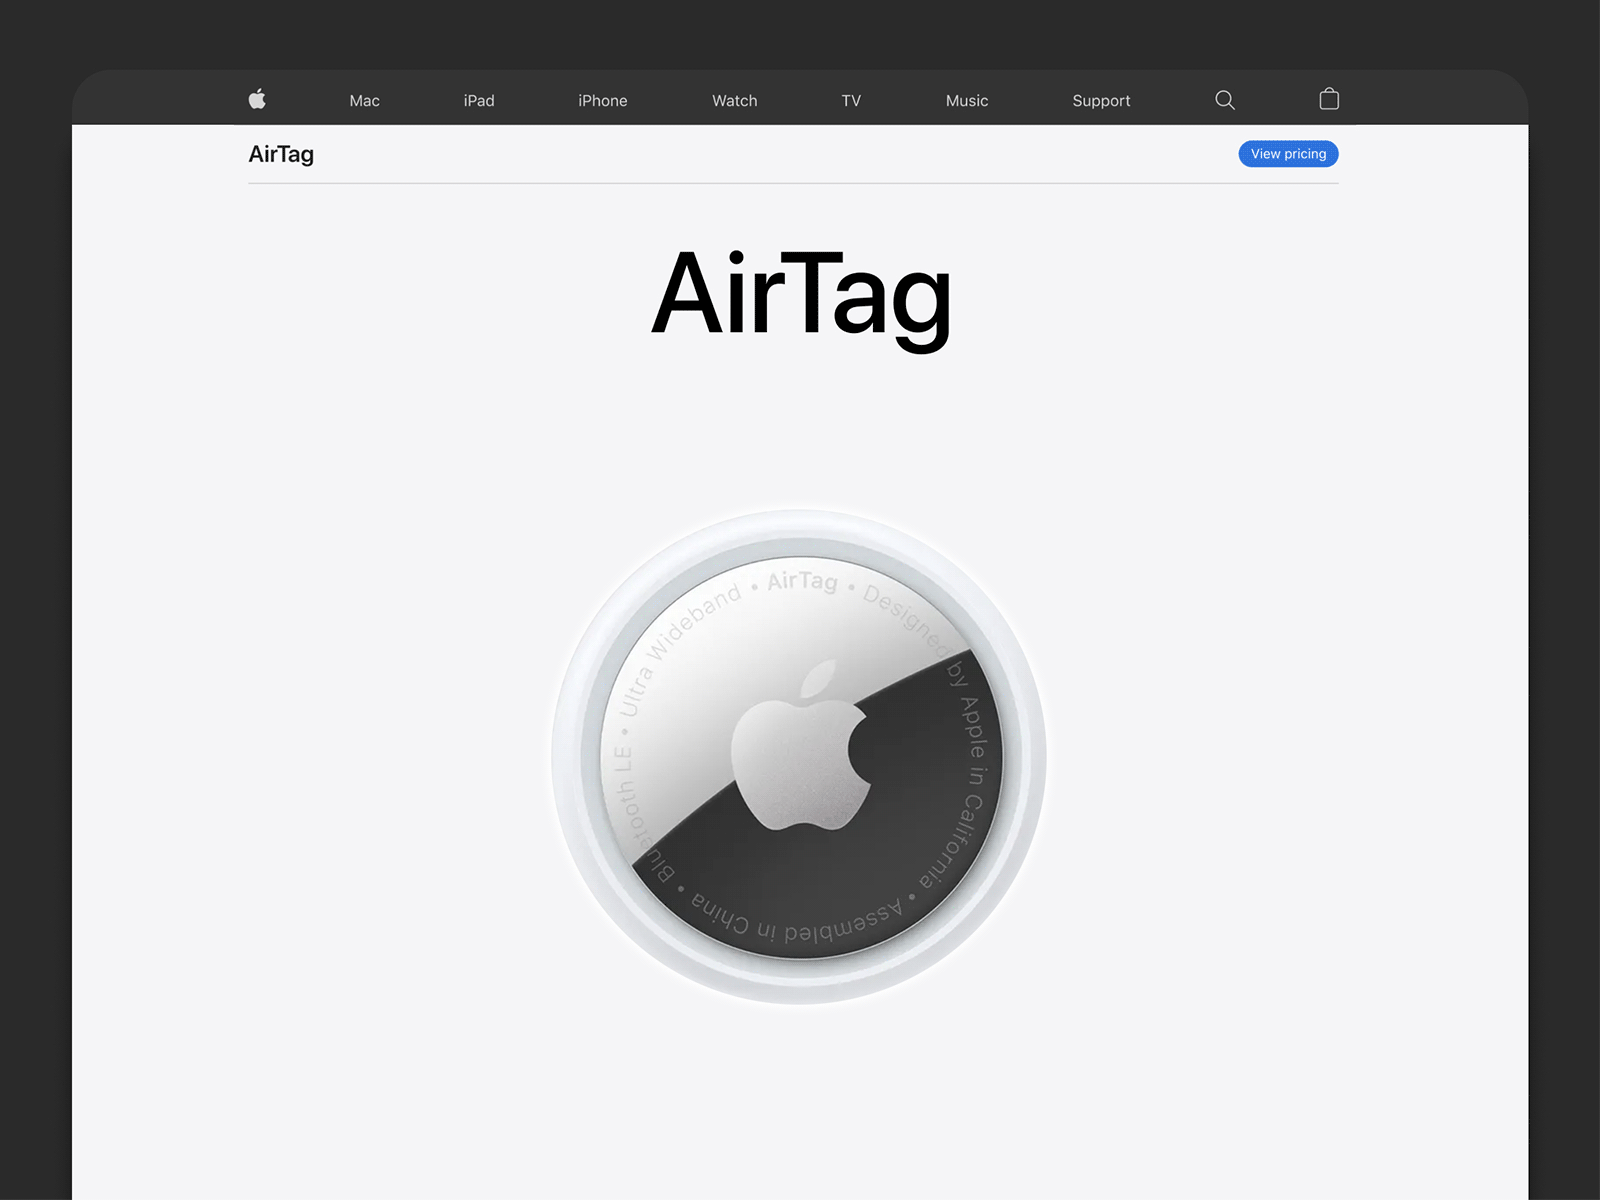 Why You Should Place An Apple AirTag In Your Wallet, by Rudy Triana